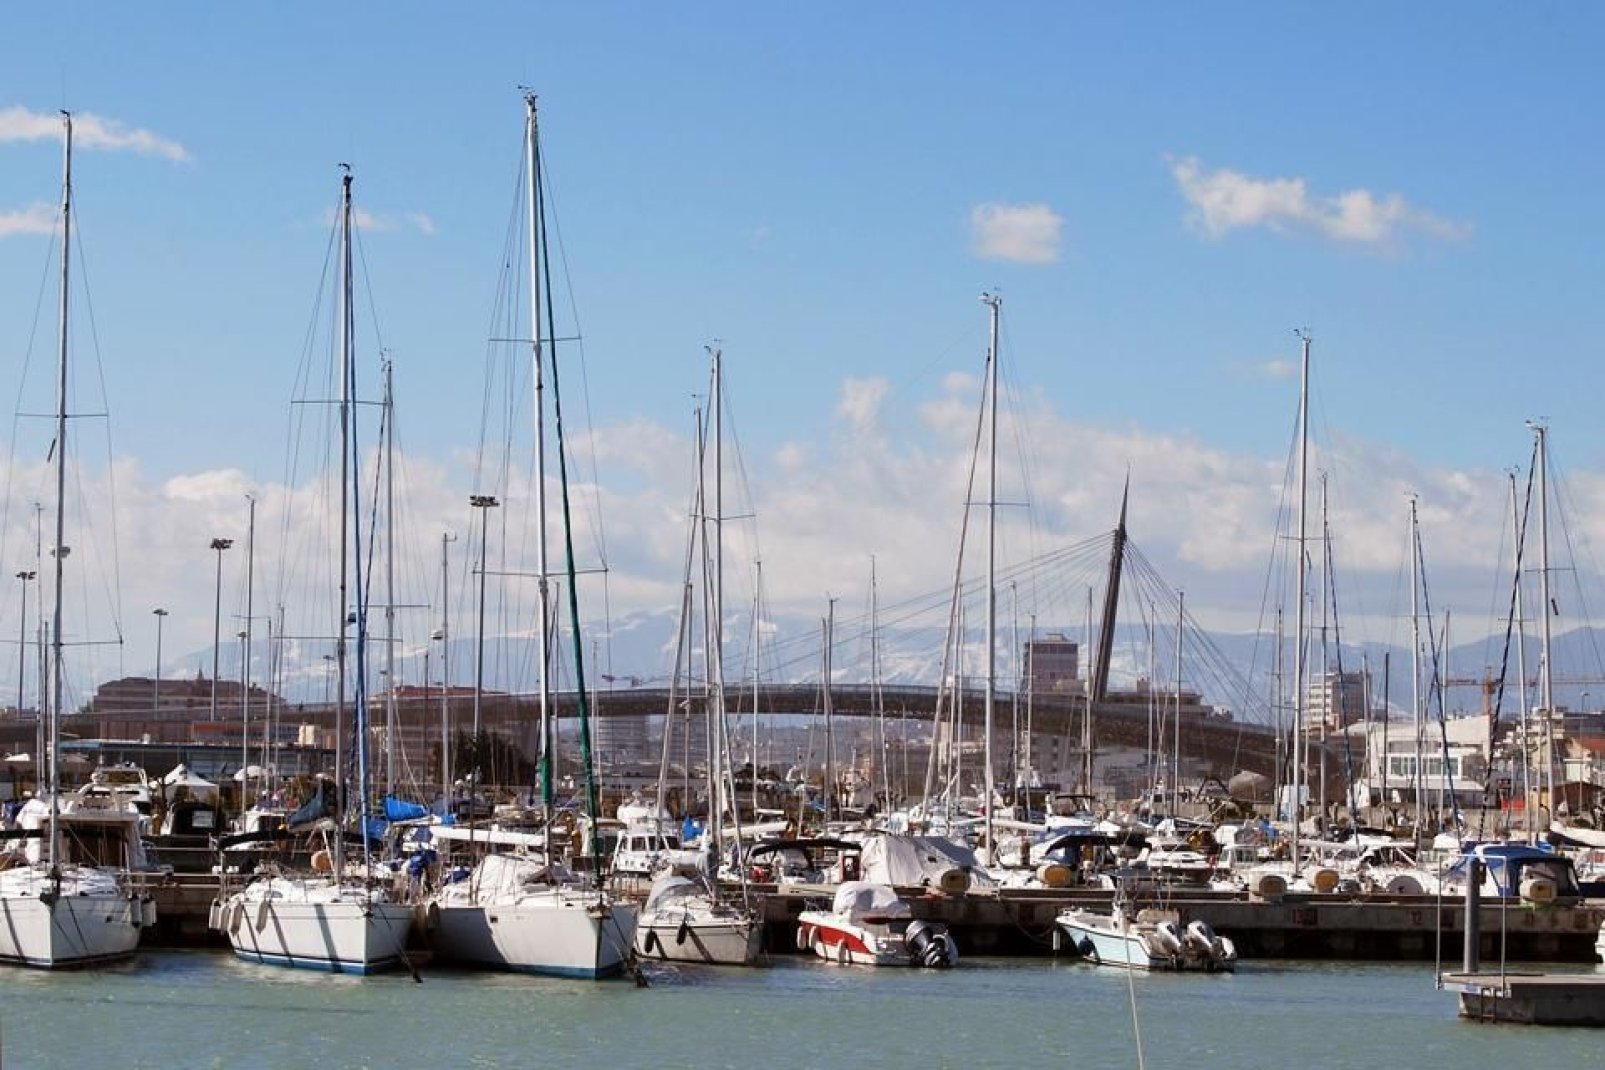 The marina is located to the immediate south of the mouth of the river.